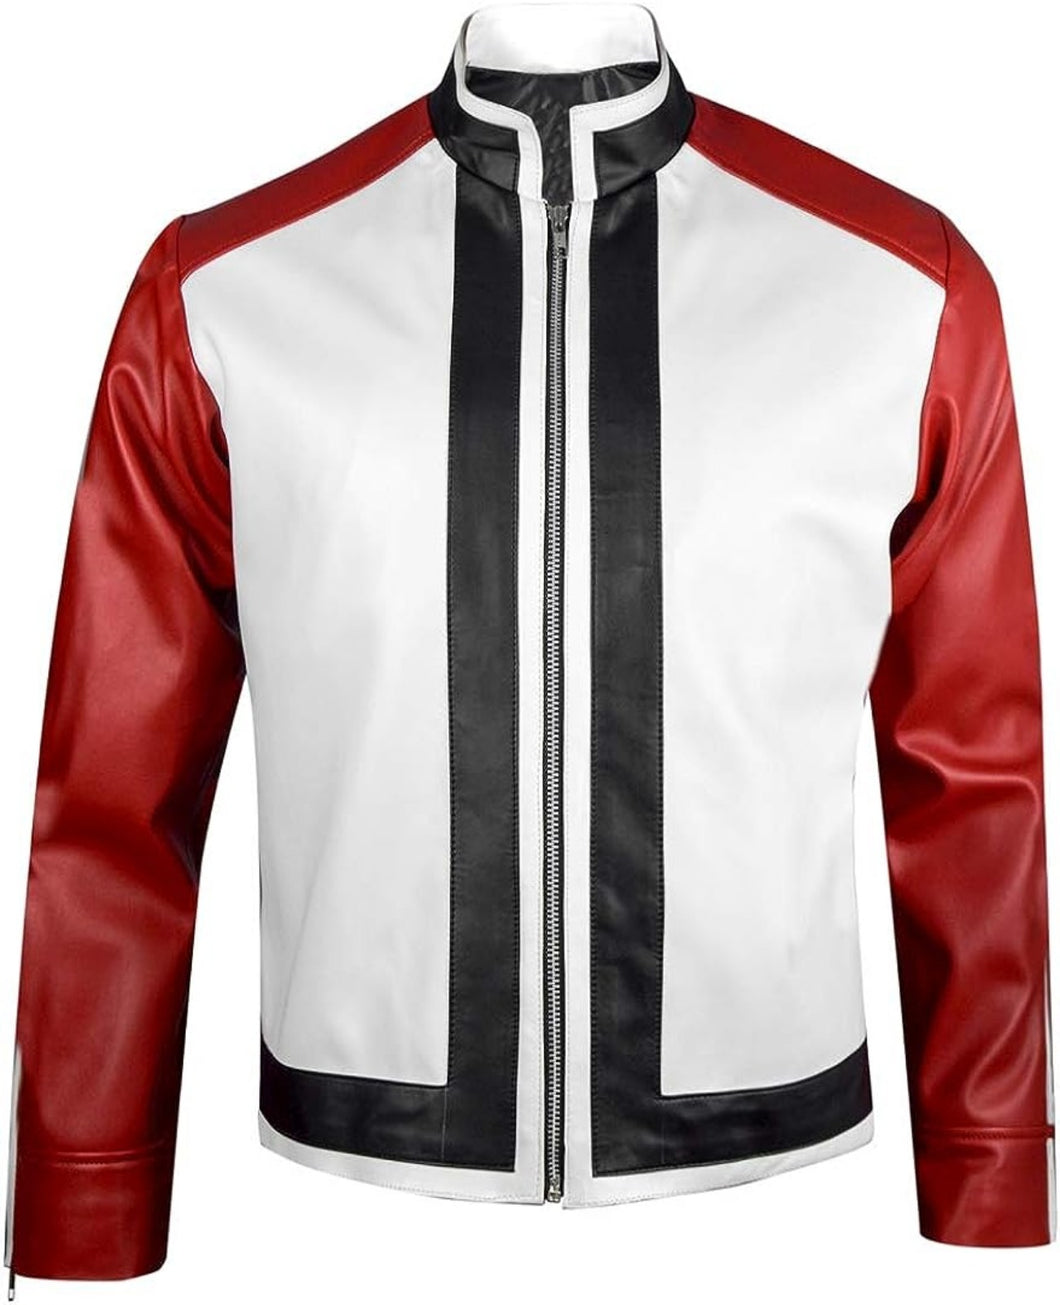 King of Fighters Red & White Leather Jacket